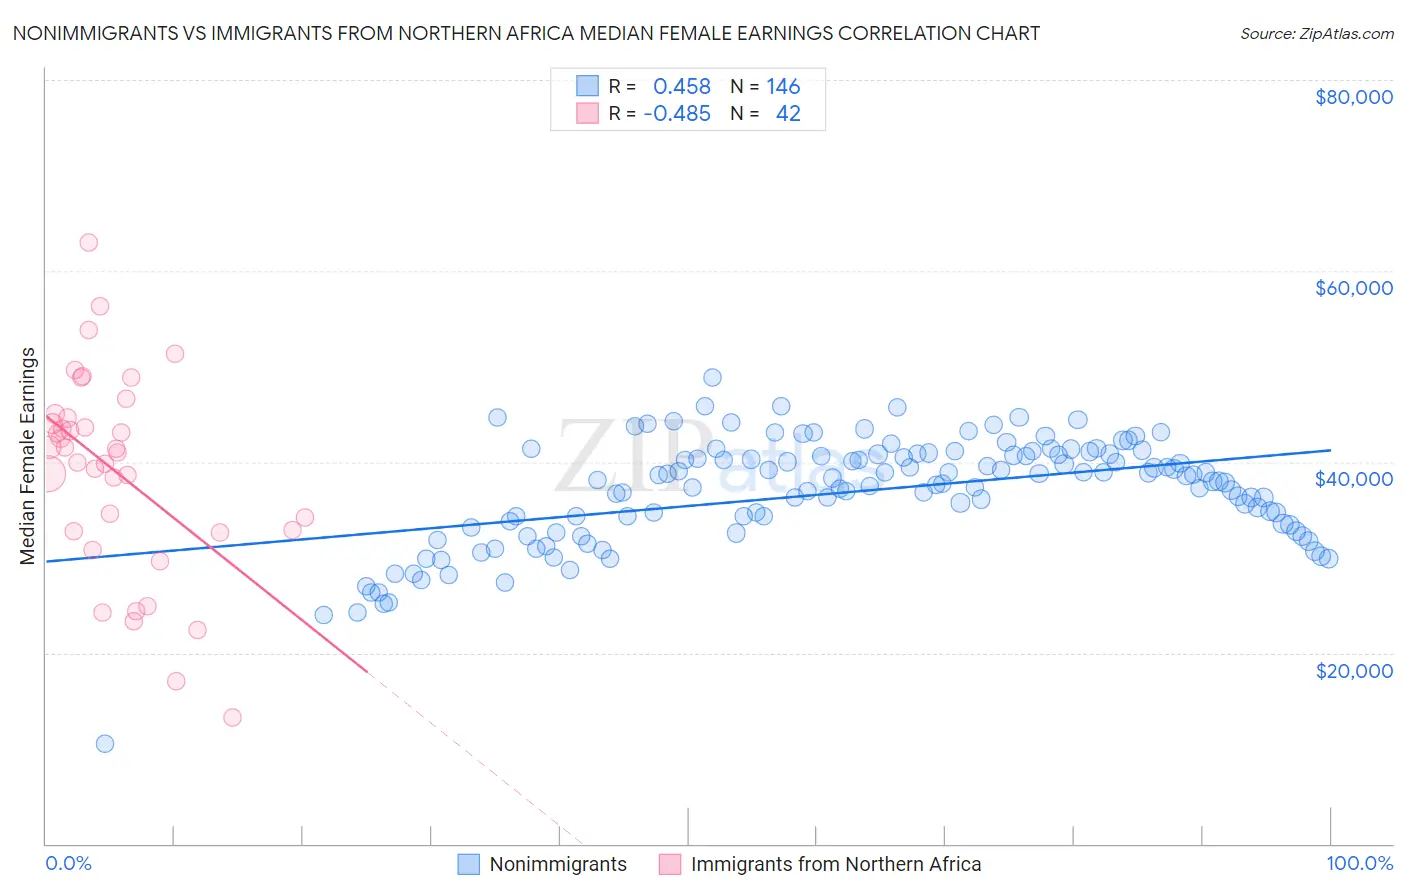 Nonimmigrants vs Immigrants from Northern Africa Median Female Earnings